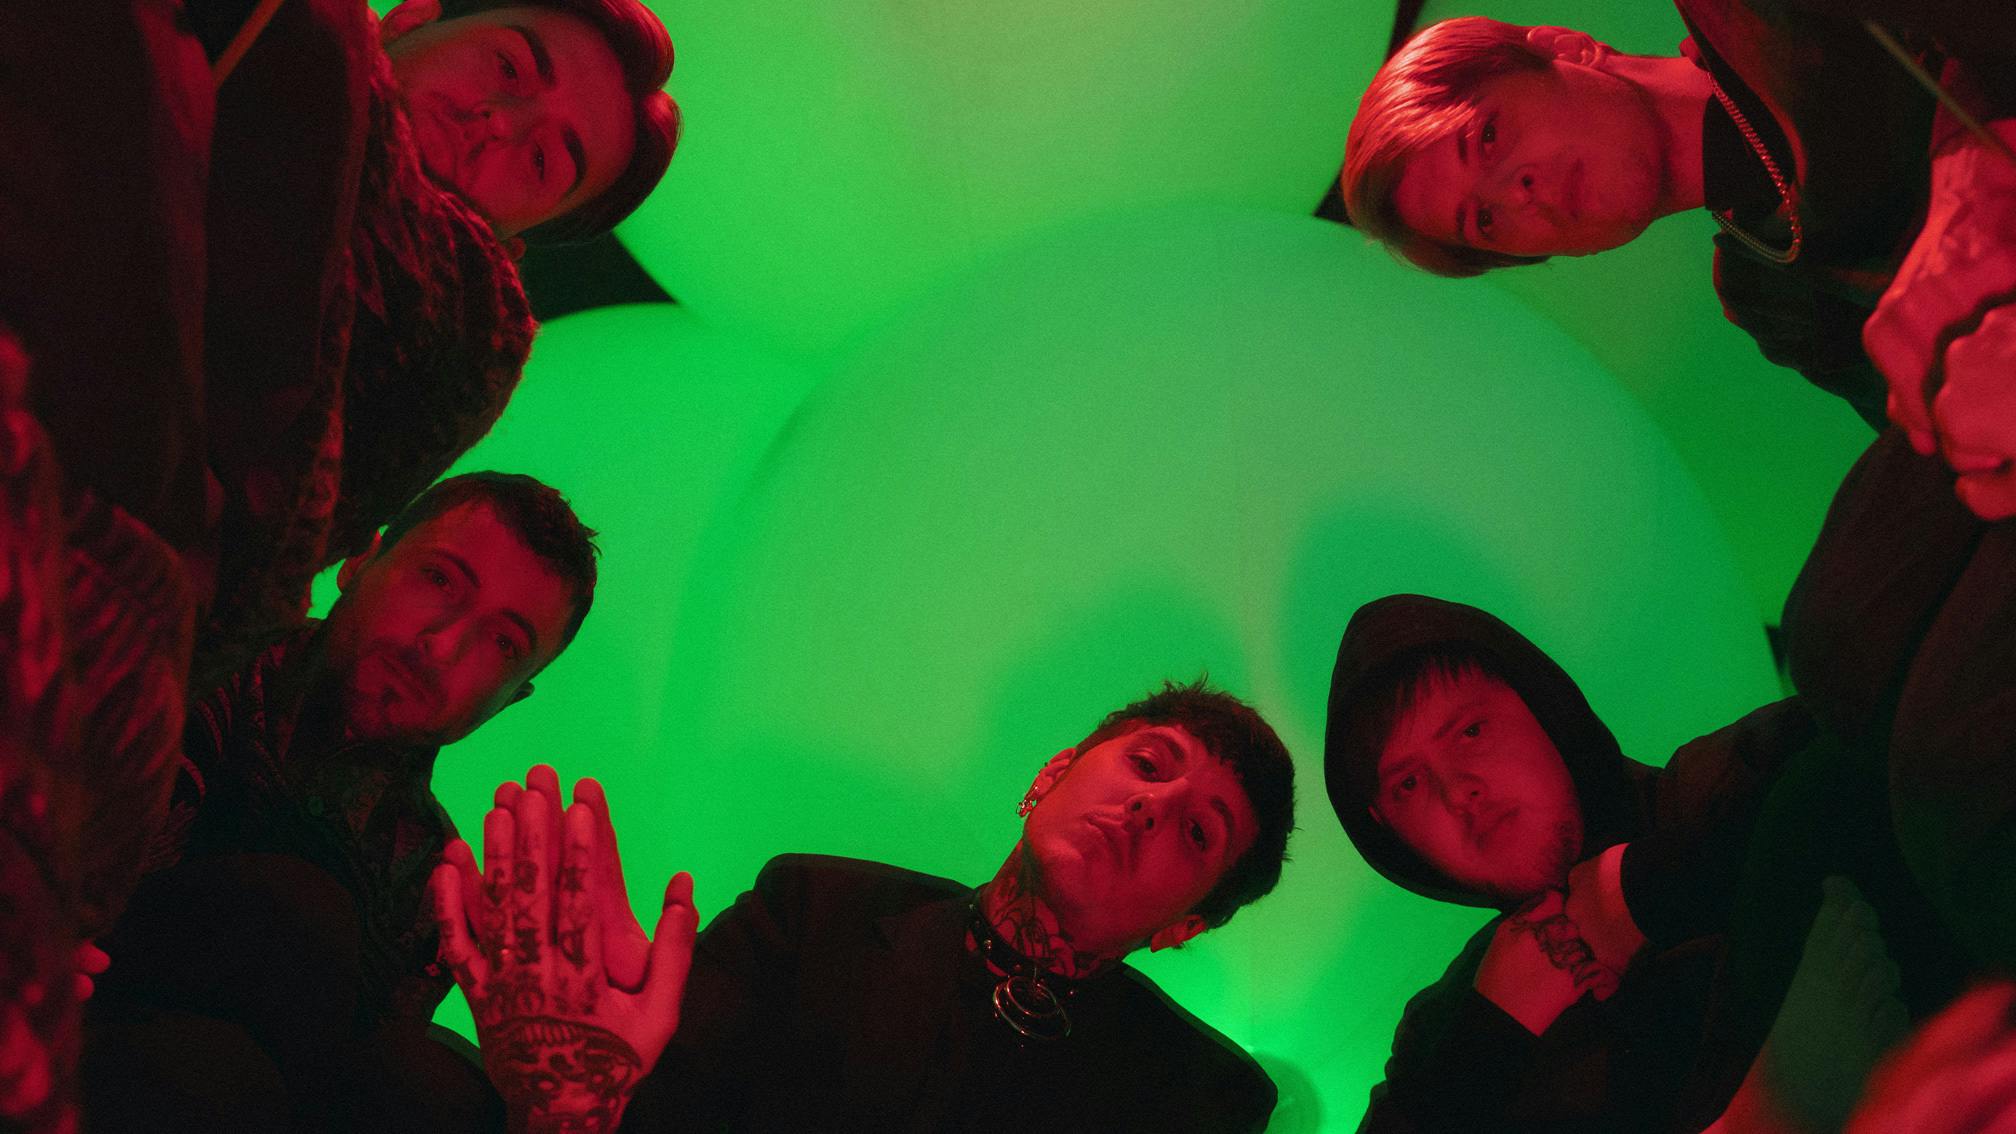 Bring Me The Horizon are battling for Number One in the UK charts